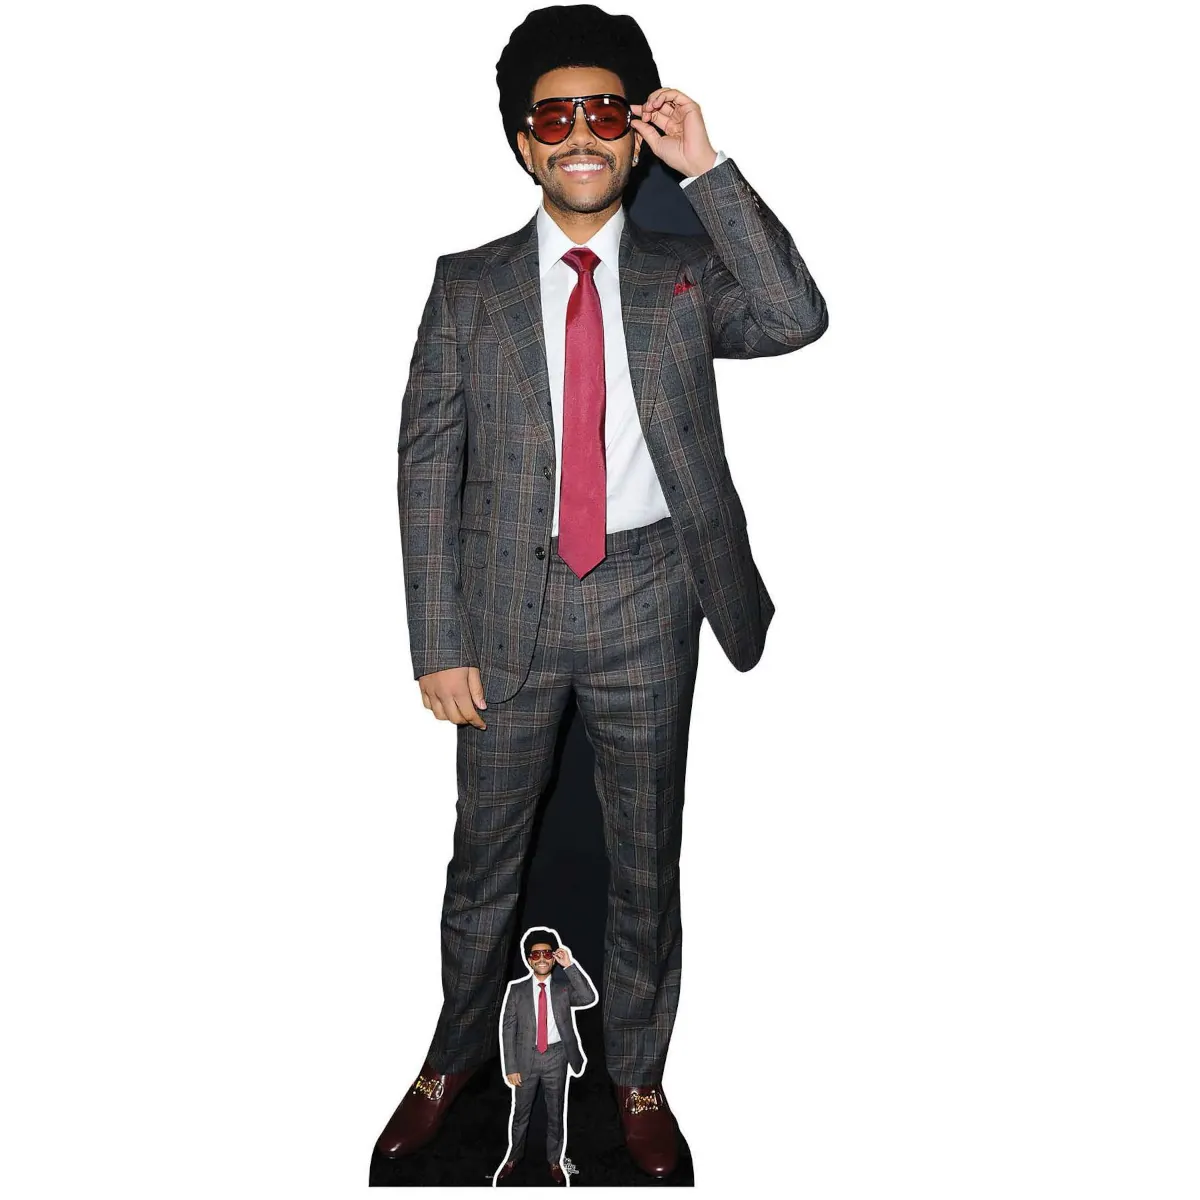 CS987 The Weeknd (Canadian Singer) Lifesize + Mini Cardboard Cutout Standee Front